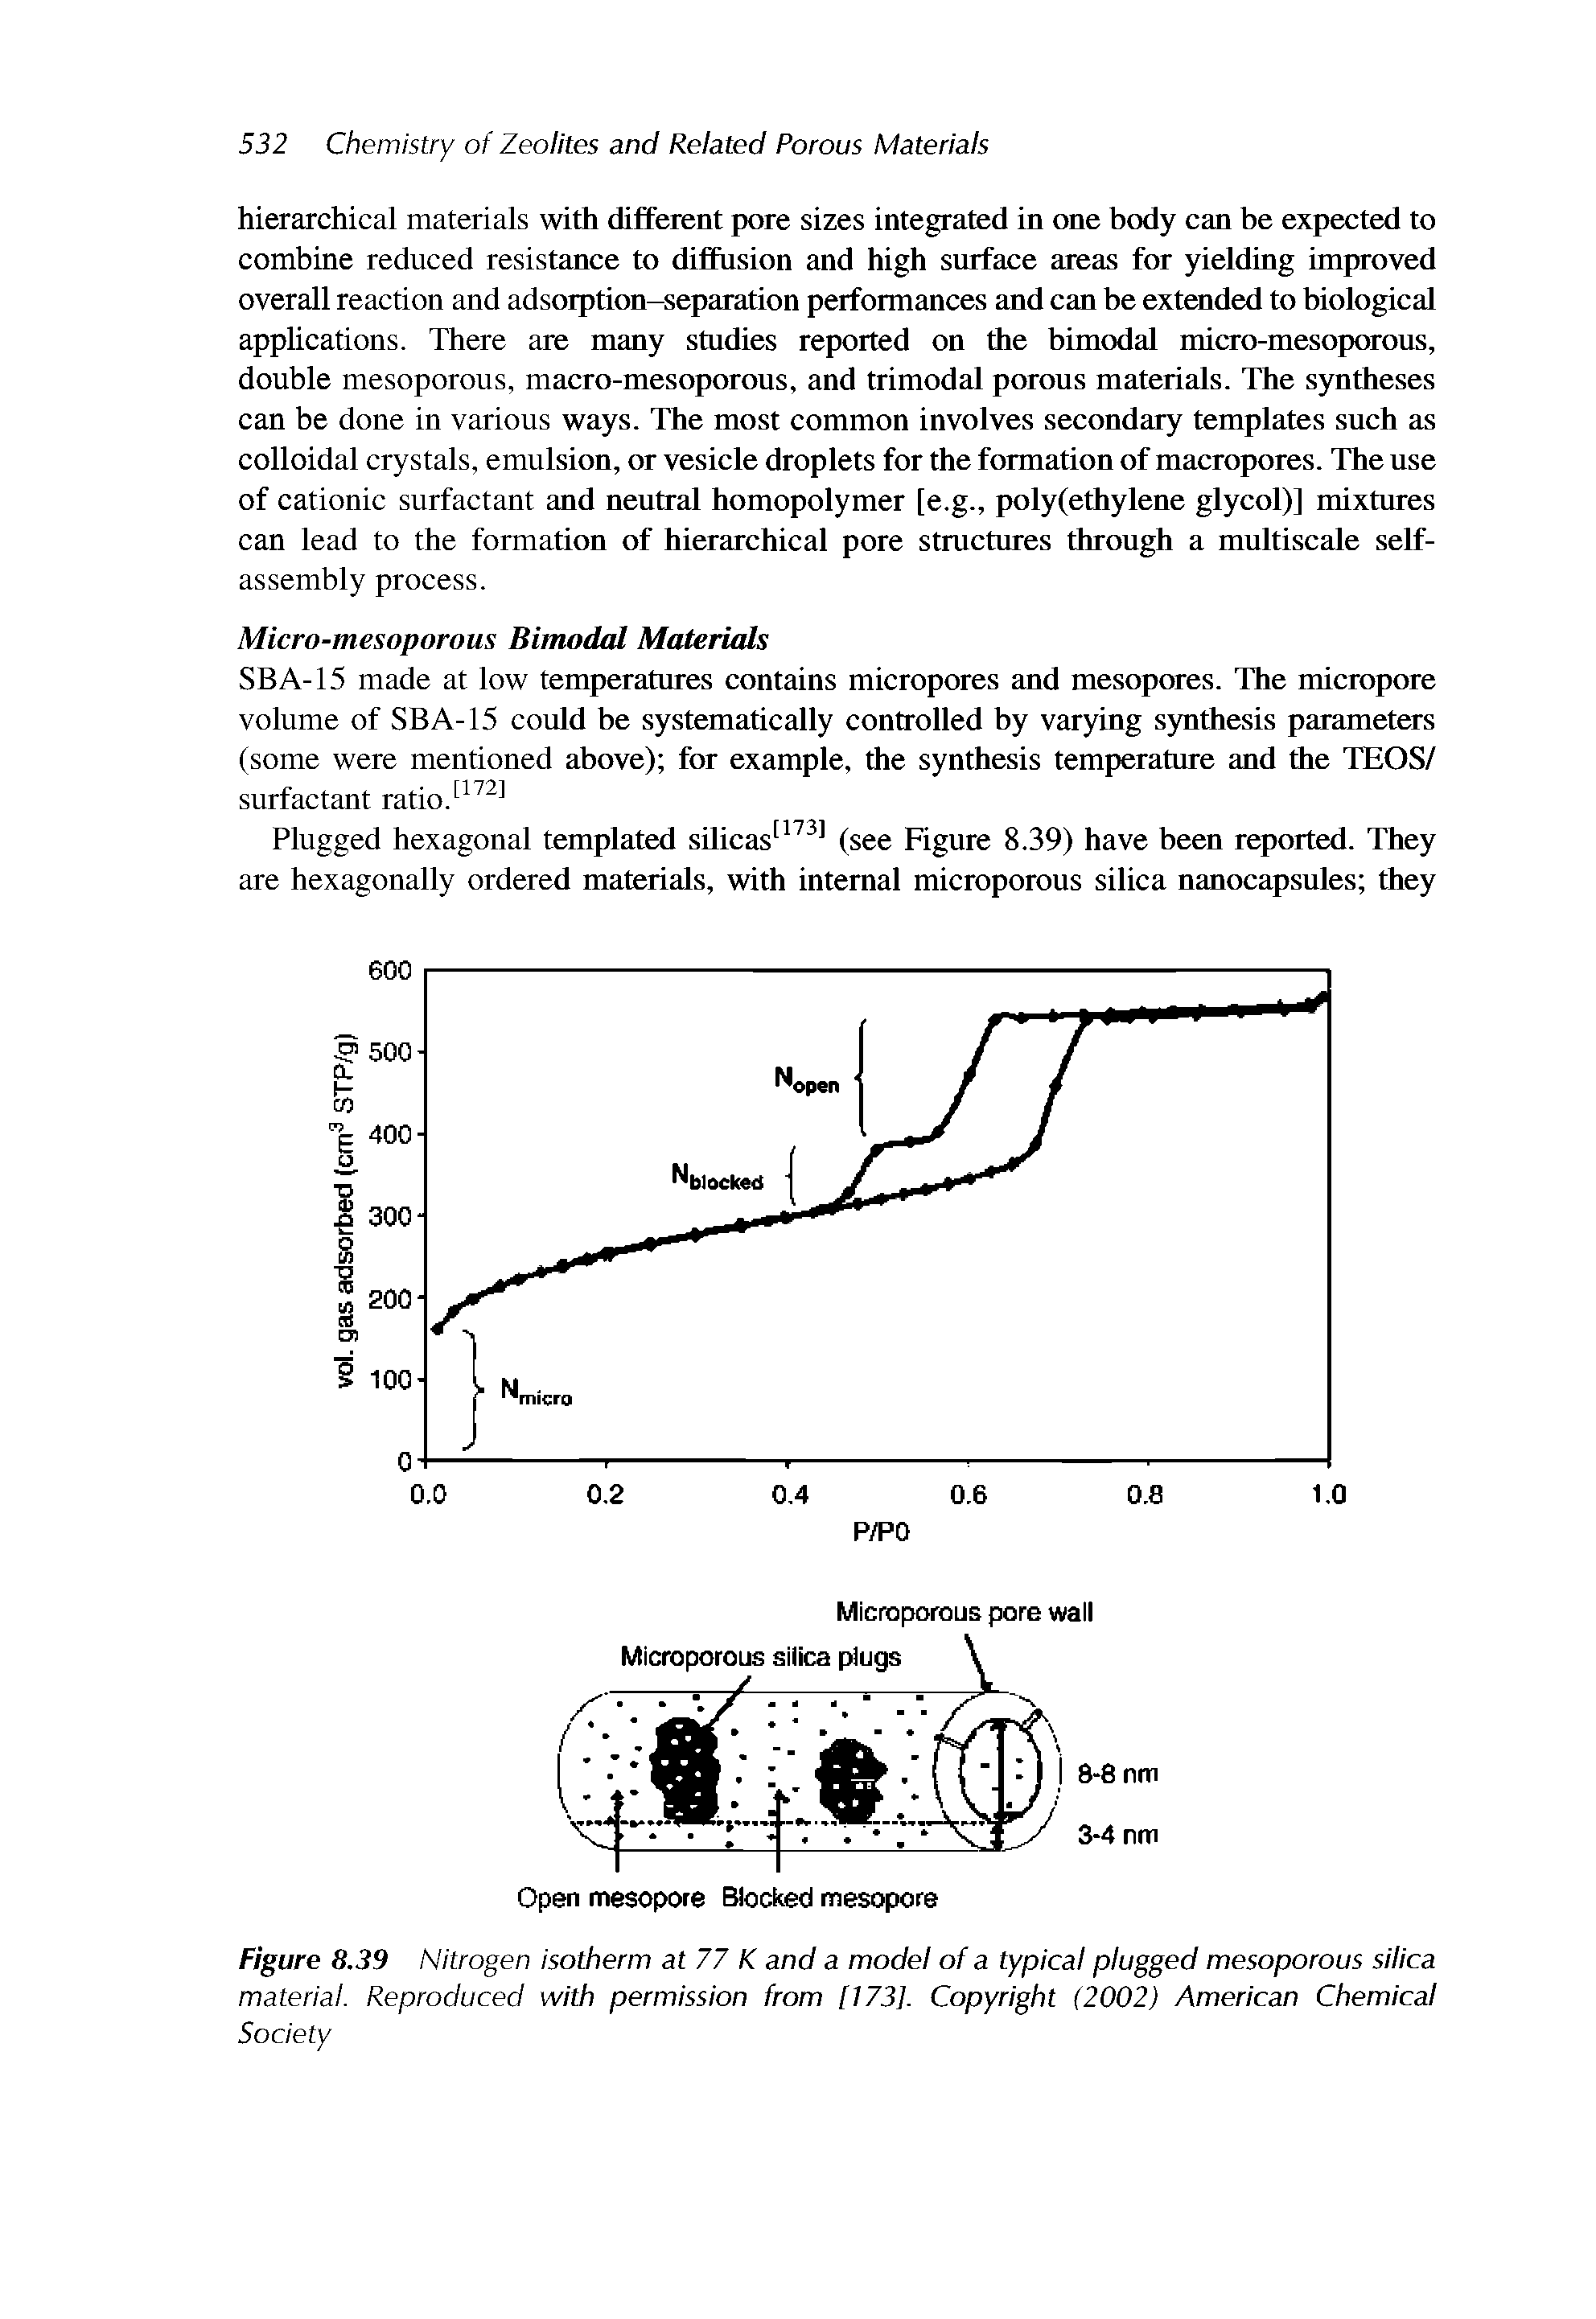 Figure 8.39 Nitrogen isotherm at 77 K and a model of a typical plugged mesoporous silica material. Reproduced with permission from [173], Copyright (2002) American Chemical...